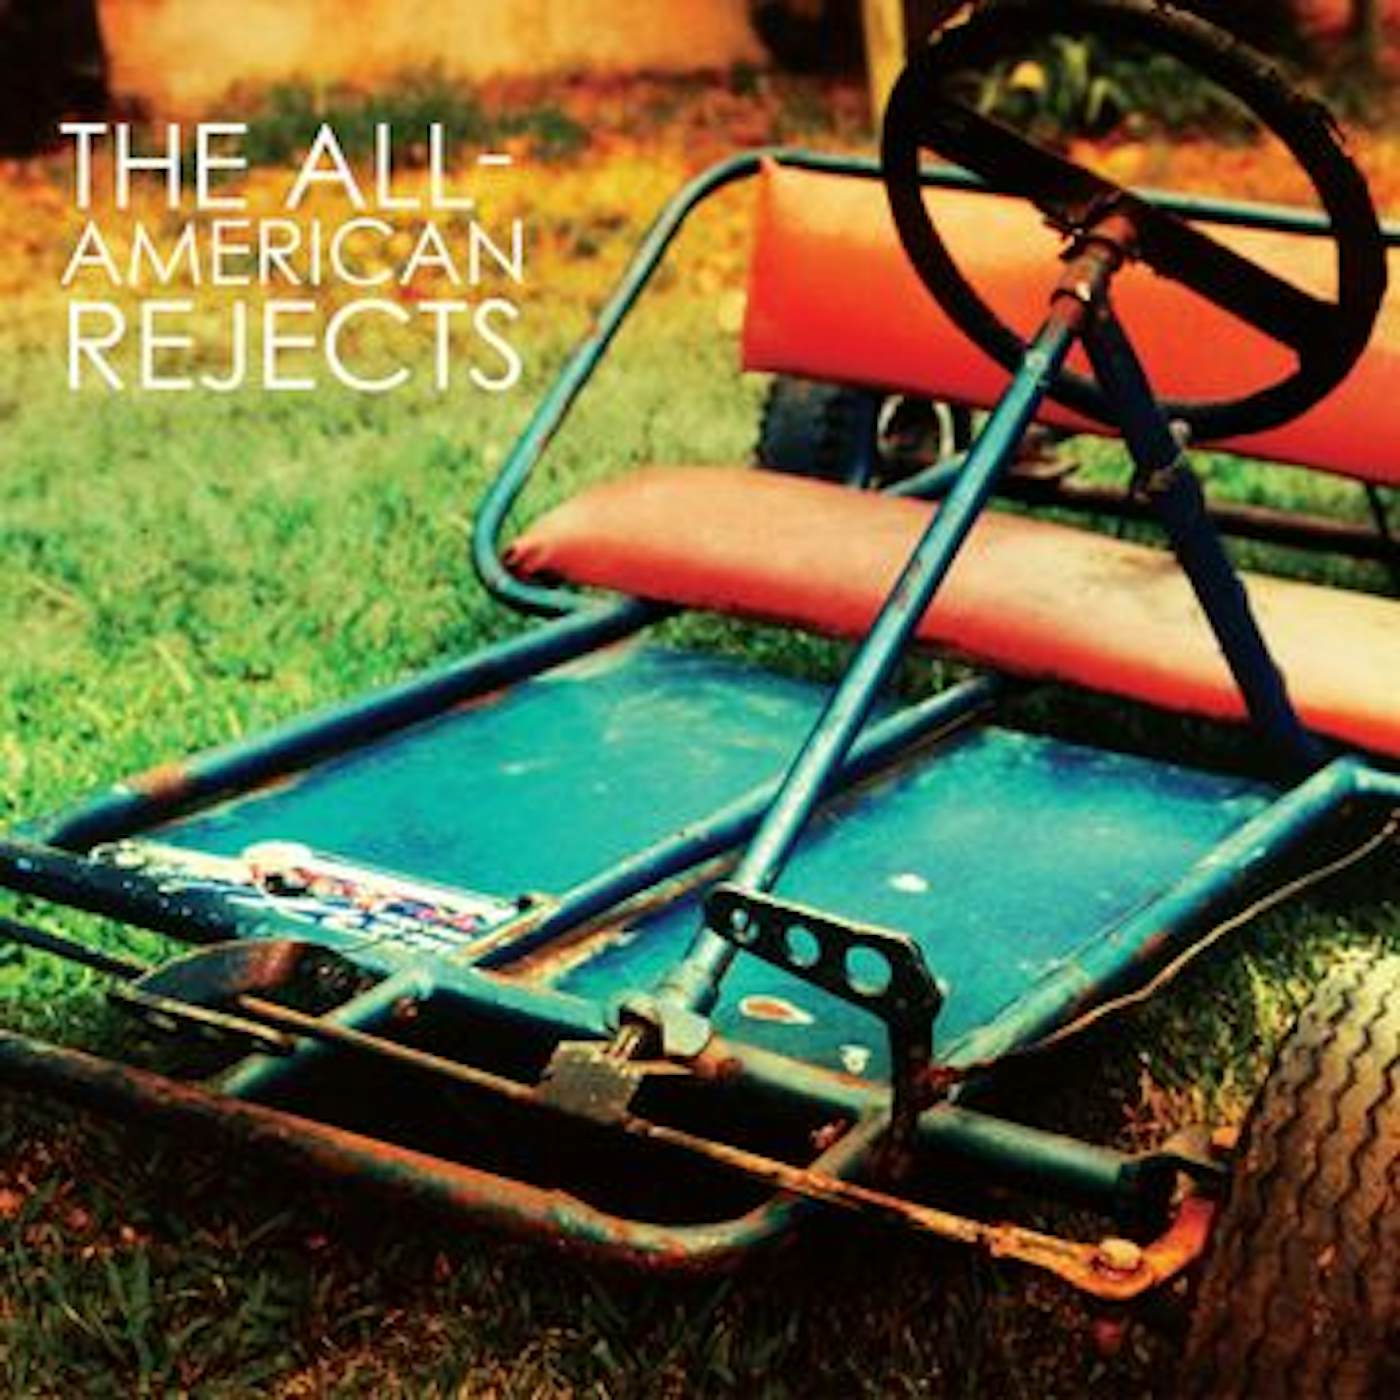 The All-American Rejects Vinyl Record